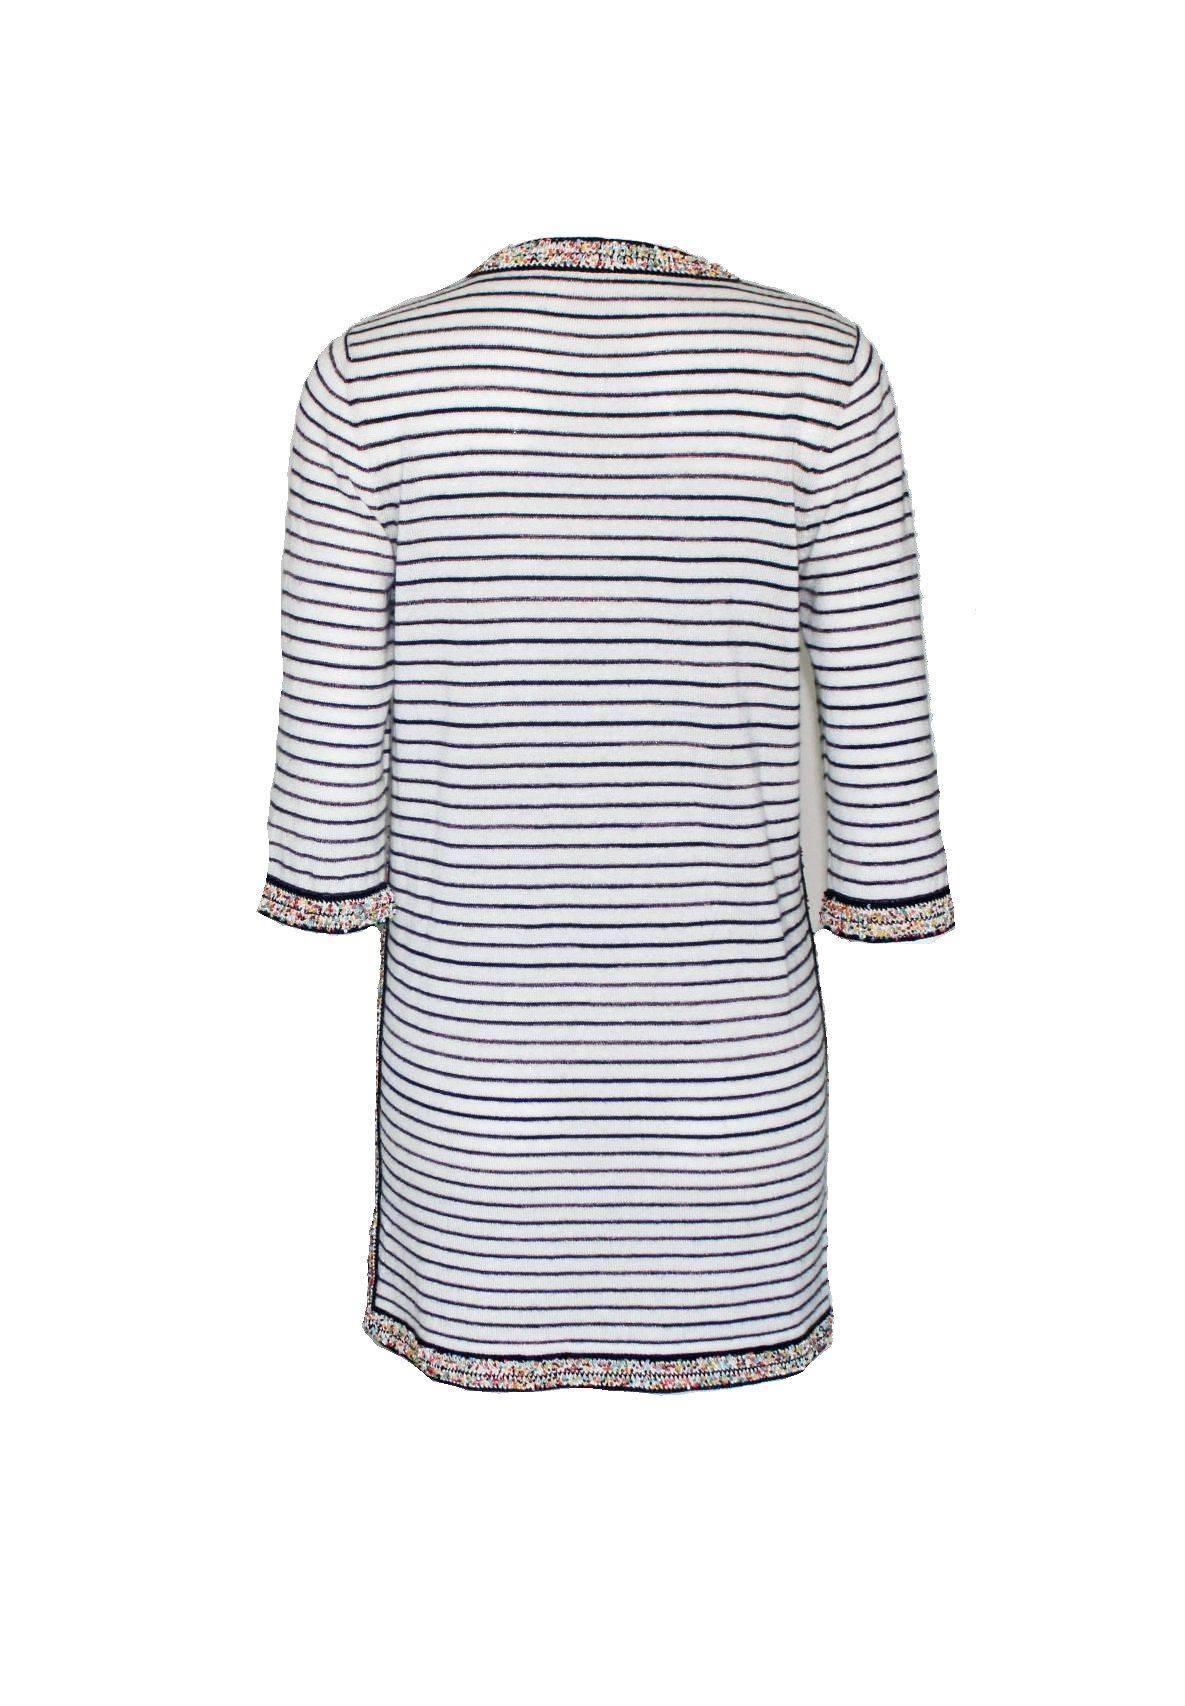 Striped signature cashmere mix dress by Chanel
So versatile, can be worn as a dress, tunic, top etc.
A timeless classic
Simply slips on
Amazing multicolor beading on hem, sleeves, neck, pockets and full sides
Finest cashmere mix knit
Two front